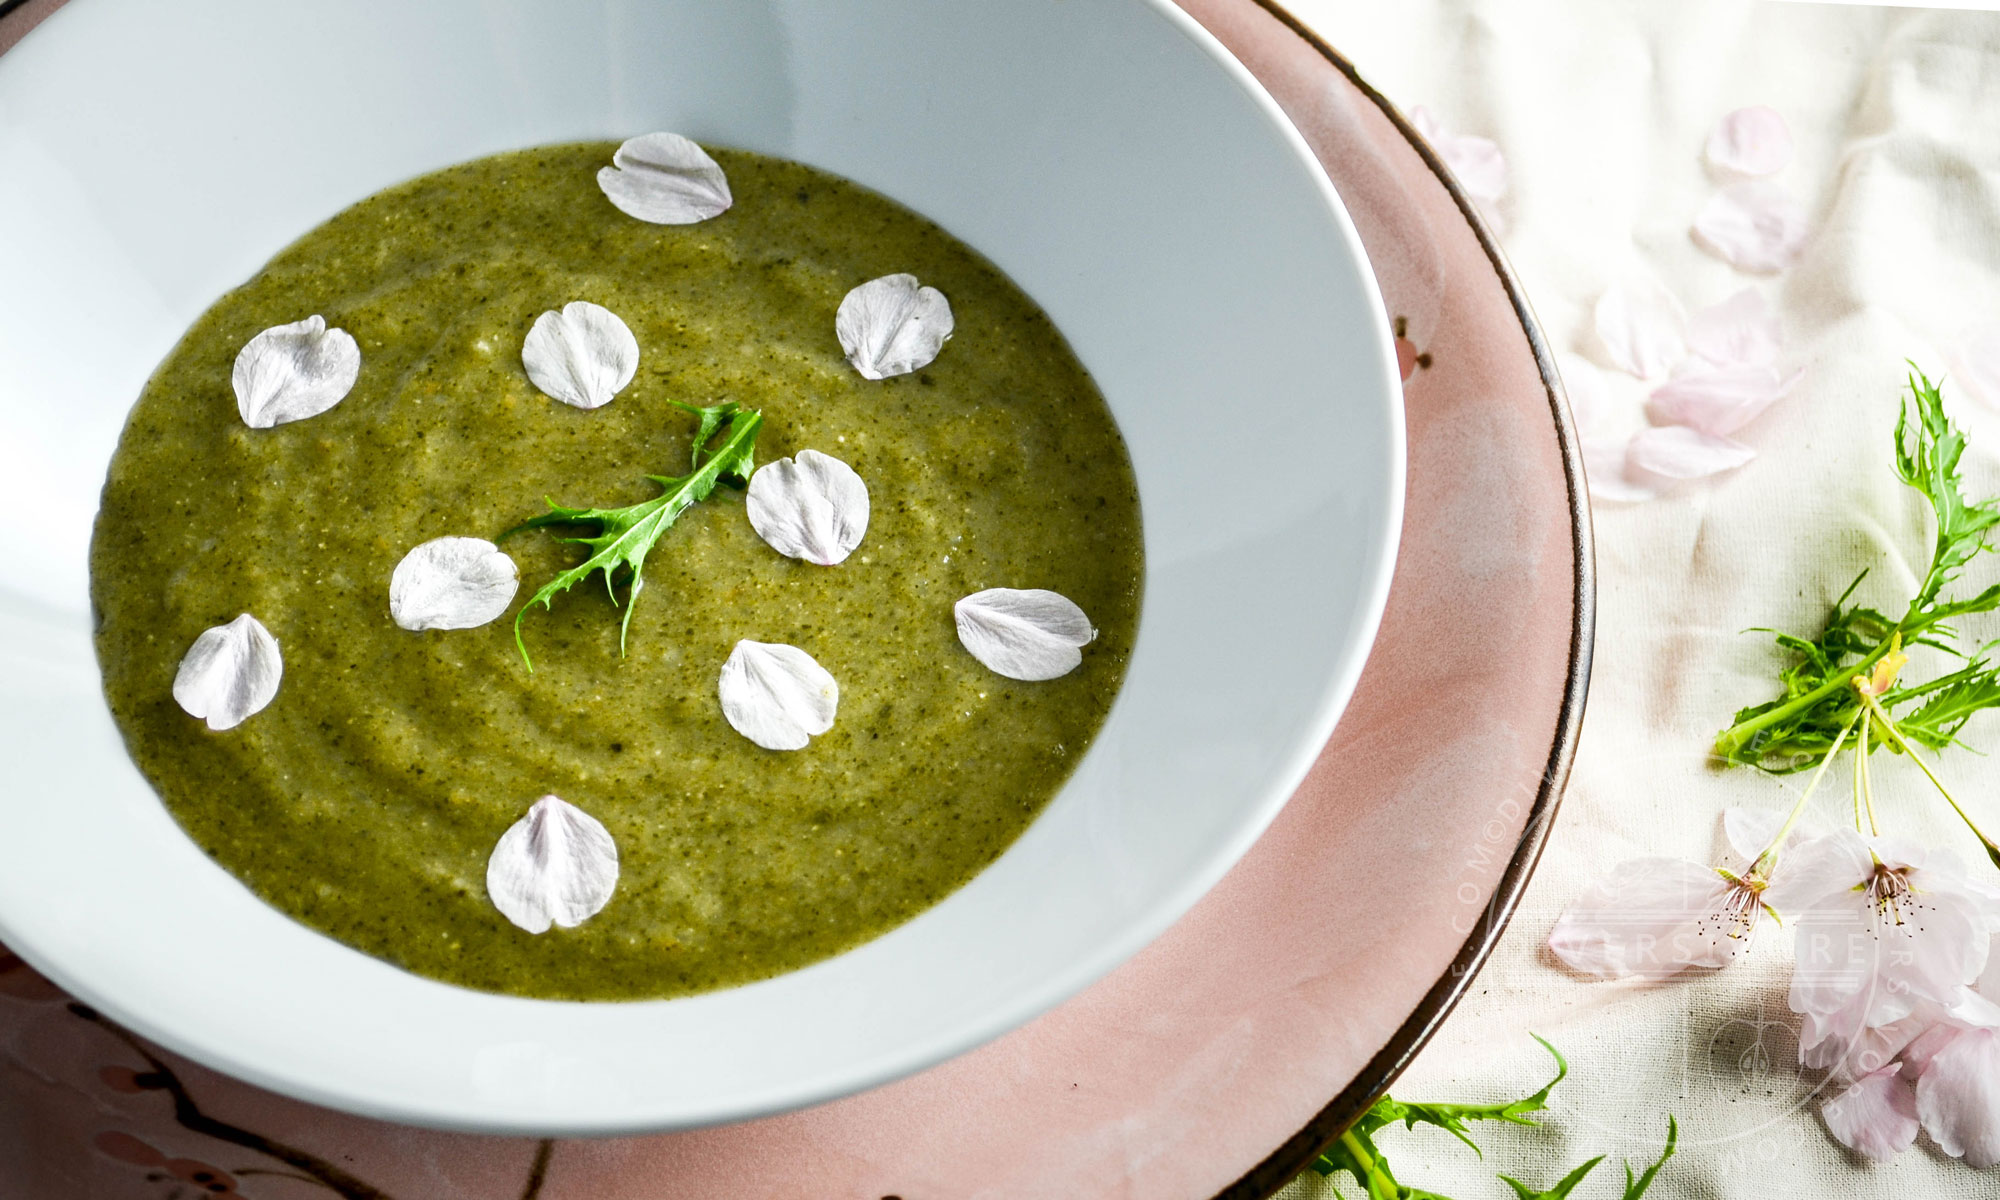 Featured image for “Japanese Nettle Soup”